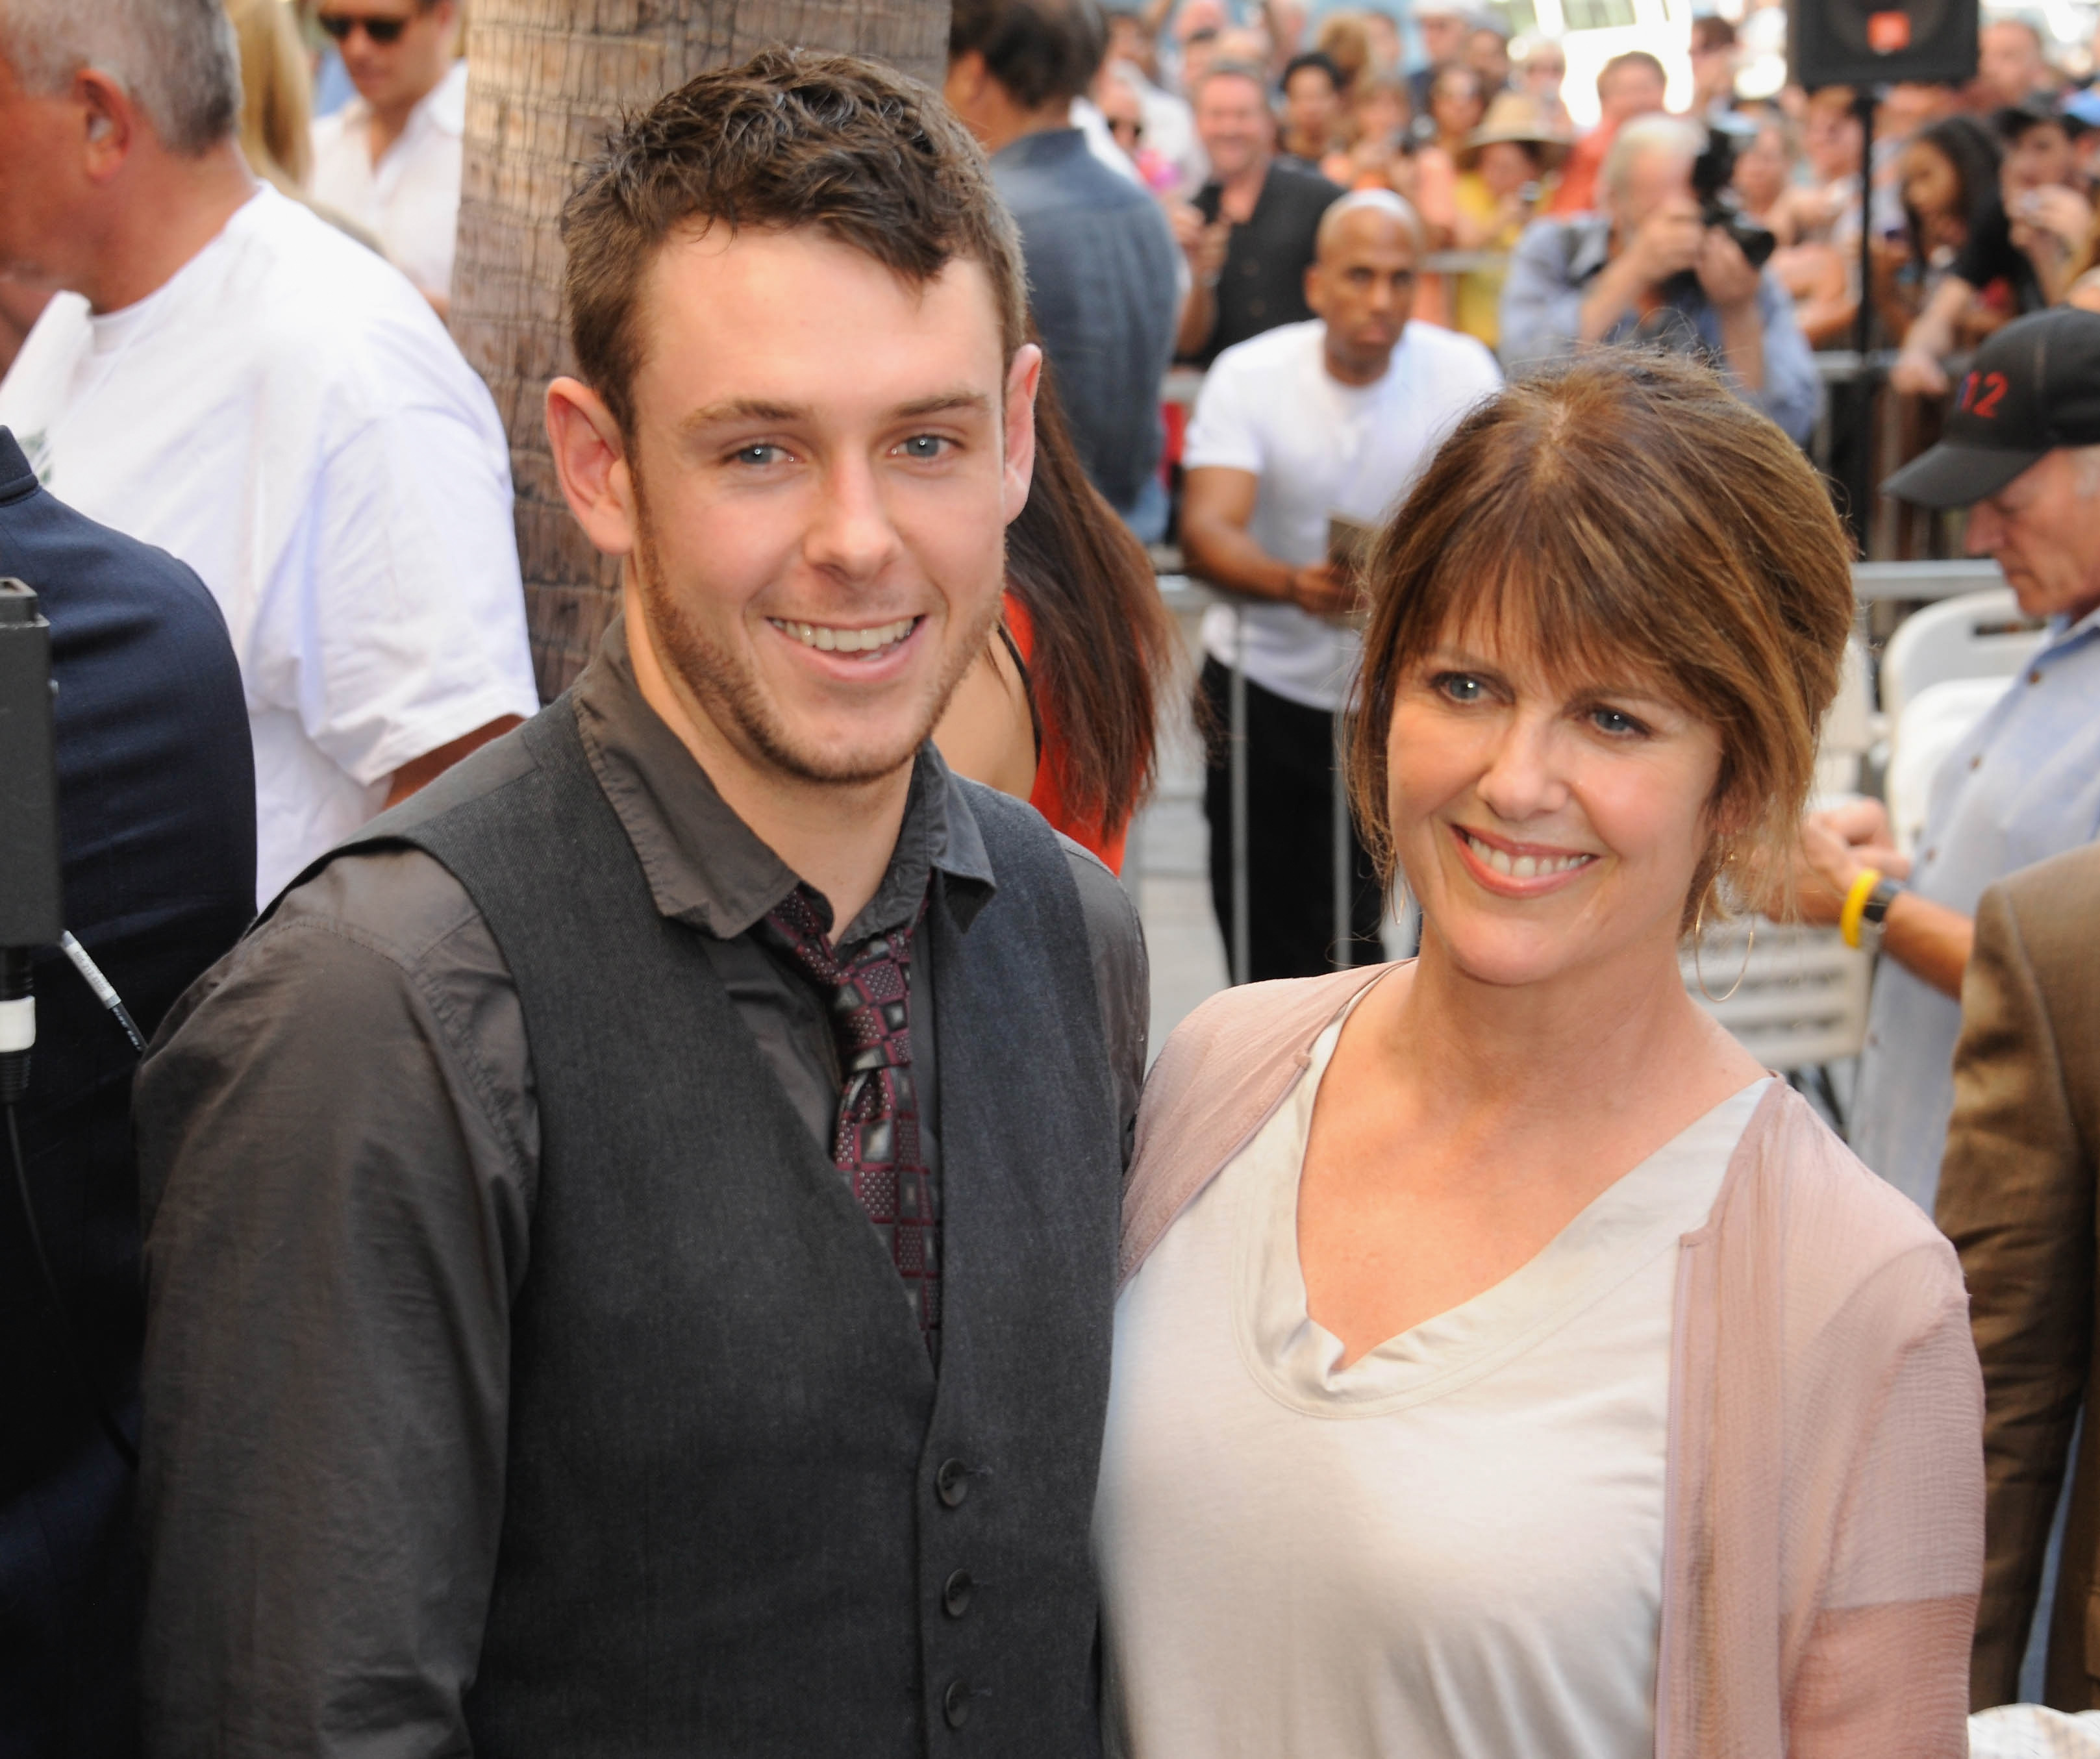 Sean Harmon and Pam Dawber at the Mark Harmon star ceremony on the Hollywood Walk of Fame on October 1, 2012, in California. | Source: Getty Images